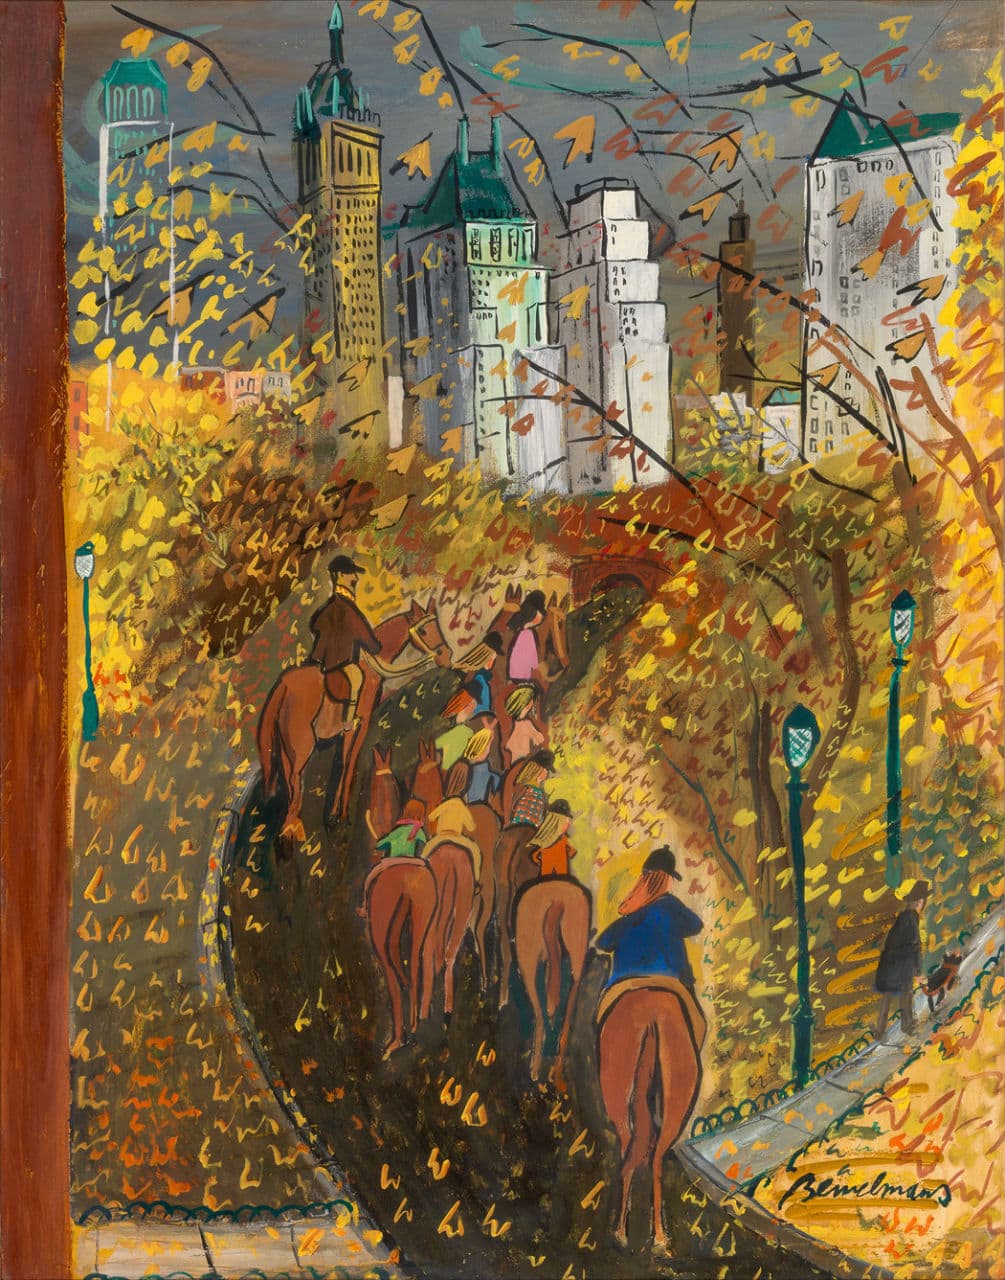 Some of Bemelmans’s finest artworks were the covers he painted for The New Yorker, like this gouache “Riding in Central Park” for the Oct. 9, 1954, issue. (From the Eric Carle Museum exhibition. © Ludwig Bemelmans, LLC)